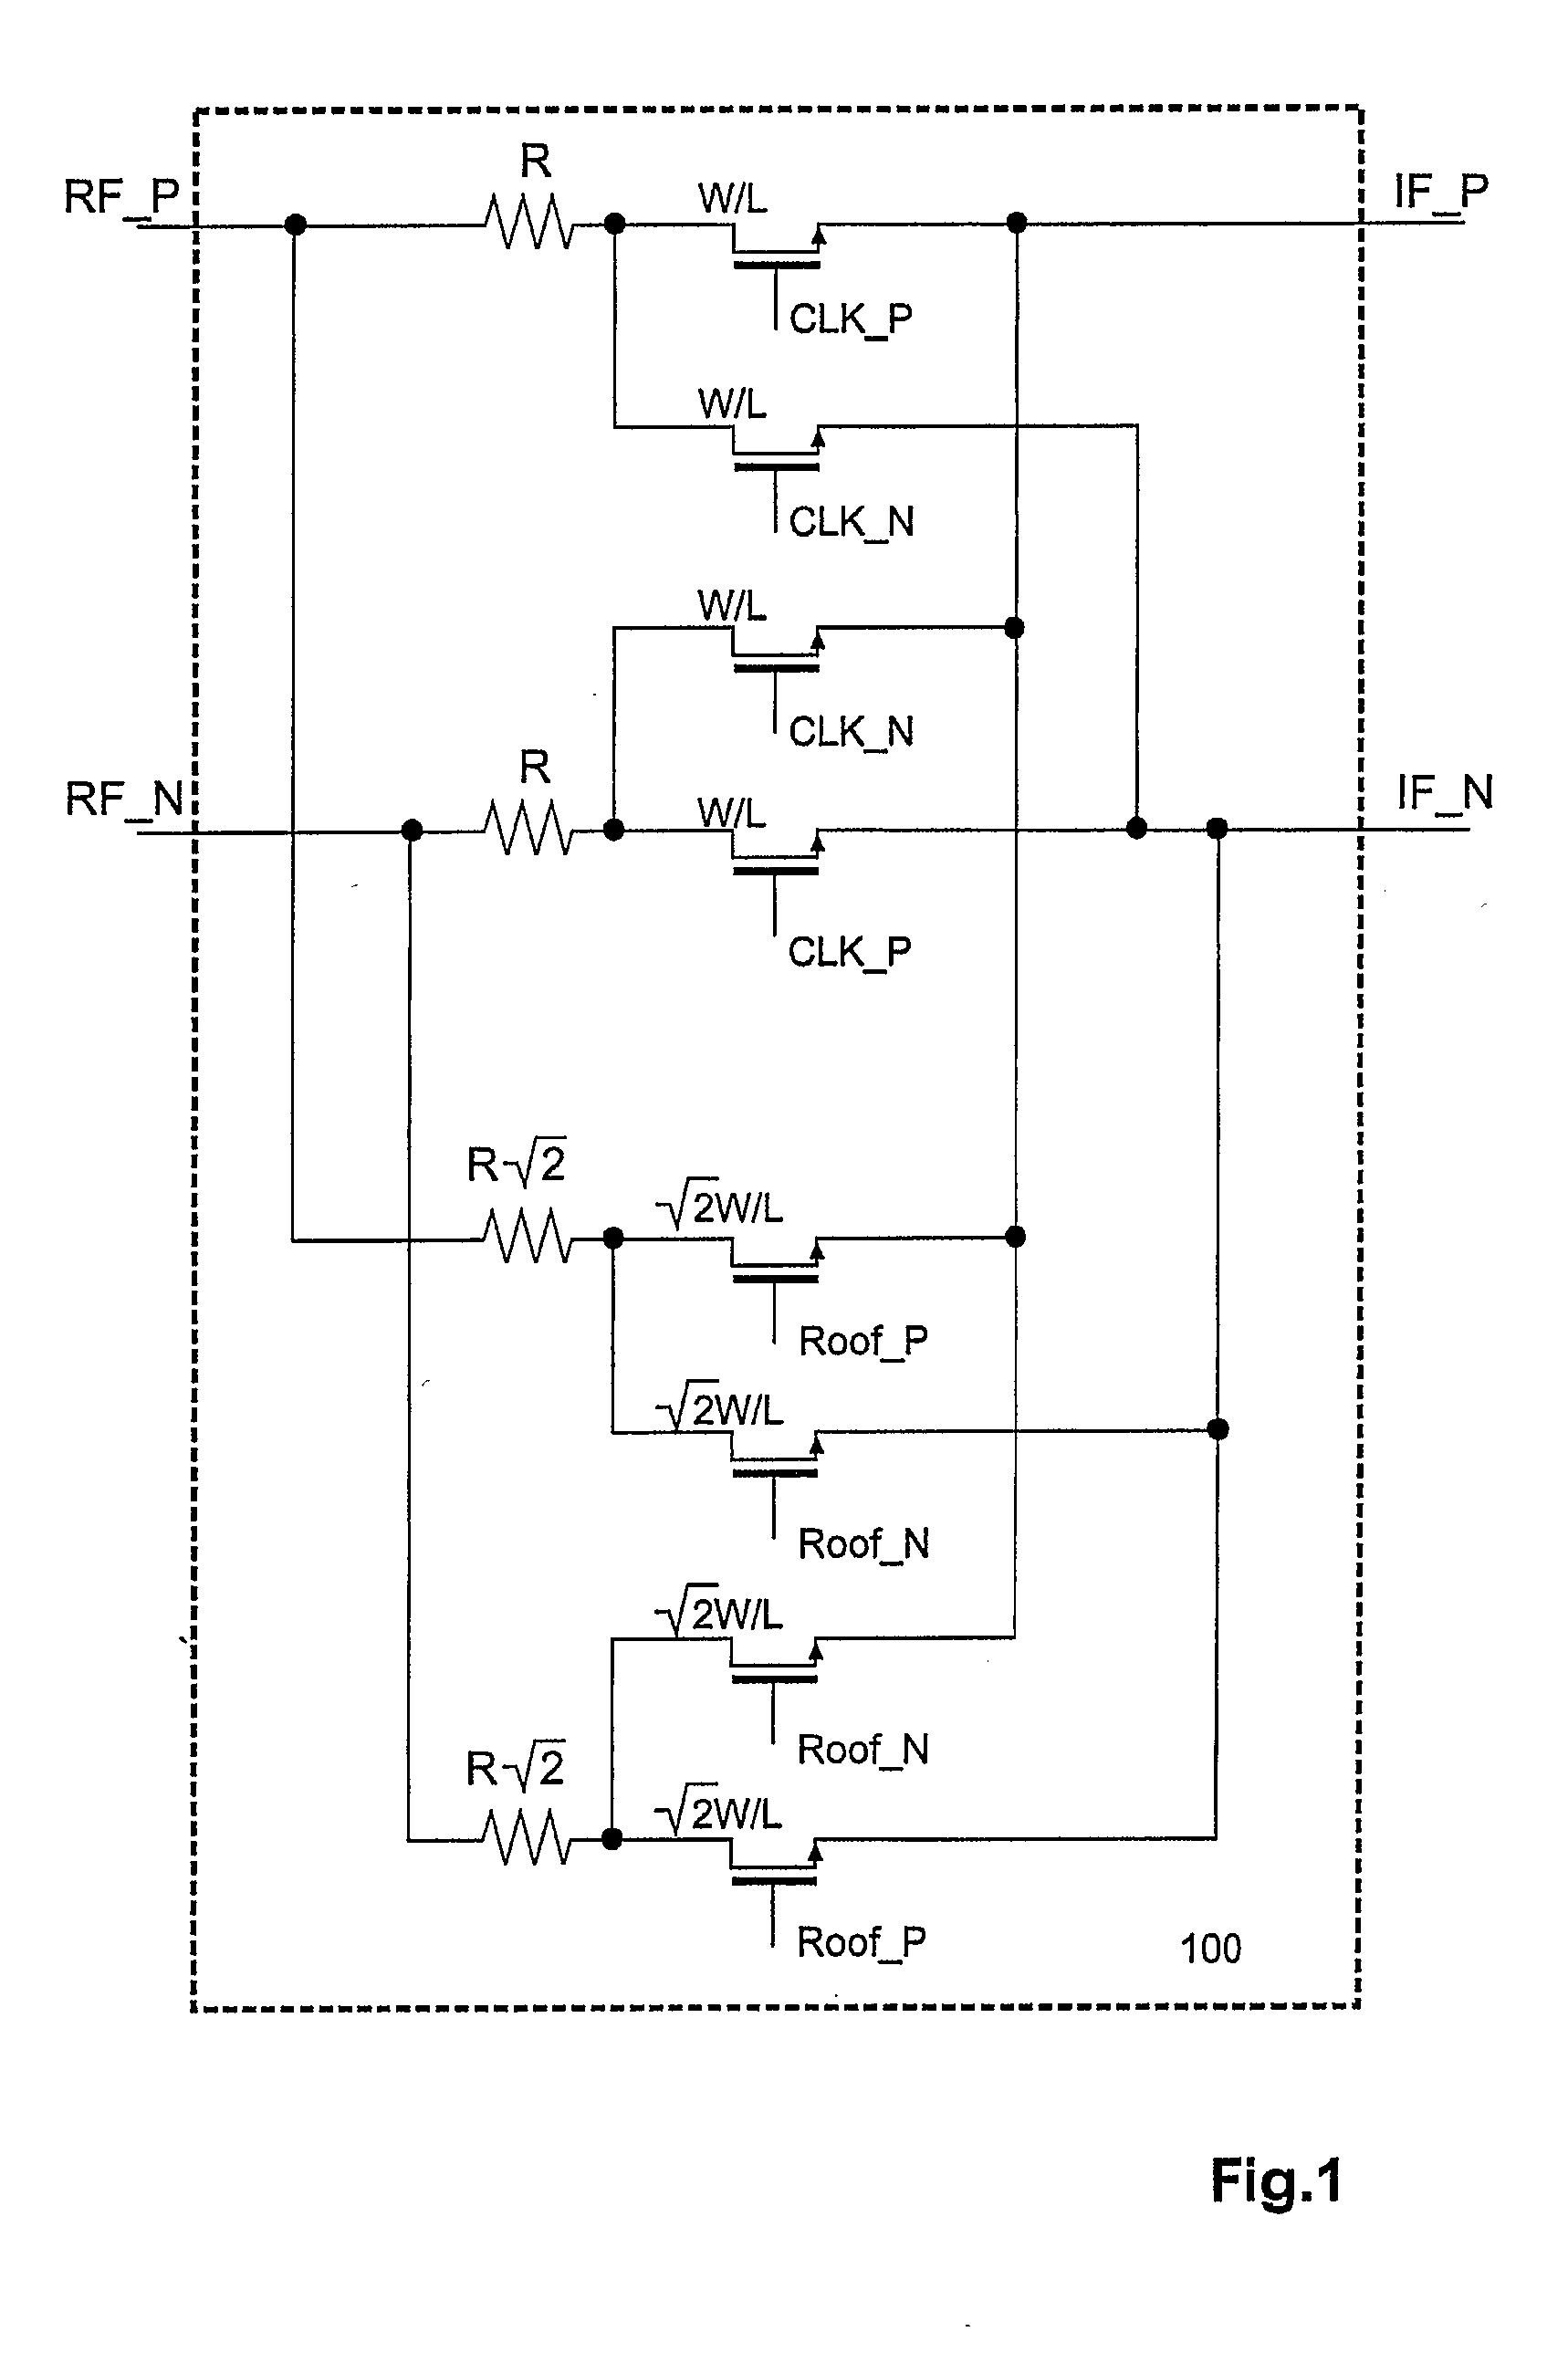 Calibration-free local oscillator signal generation for a harmonic-rejection mixer